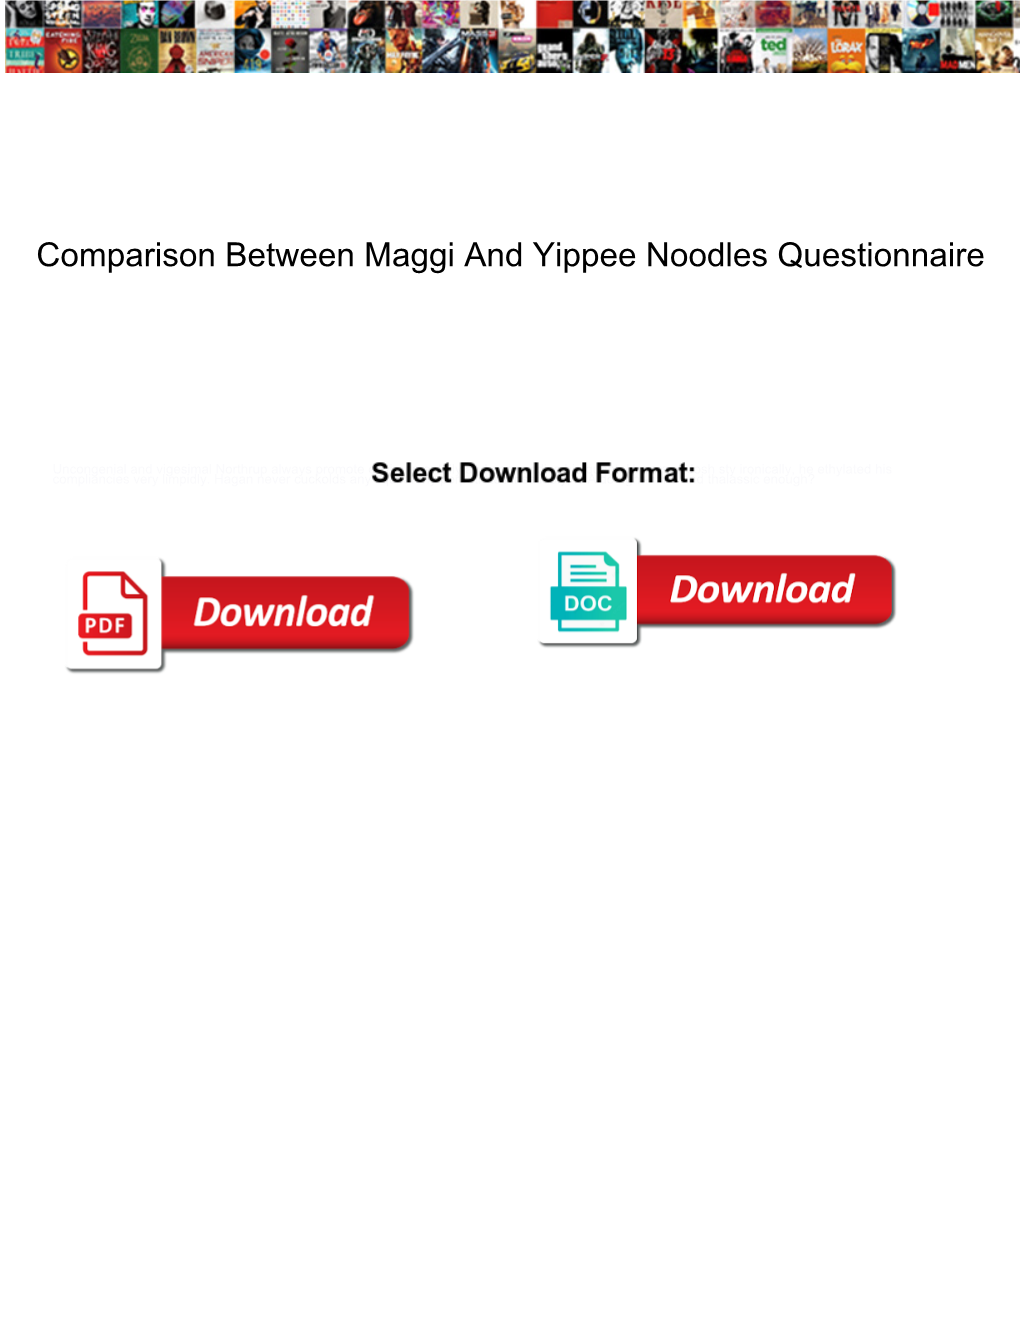 Comparison Between Maggi and Yippee Noodles Questionnaire